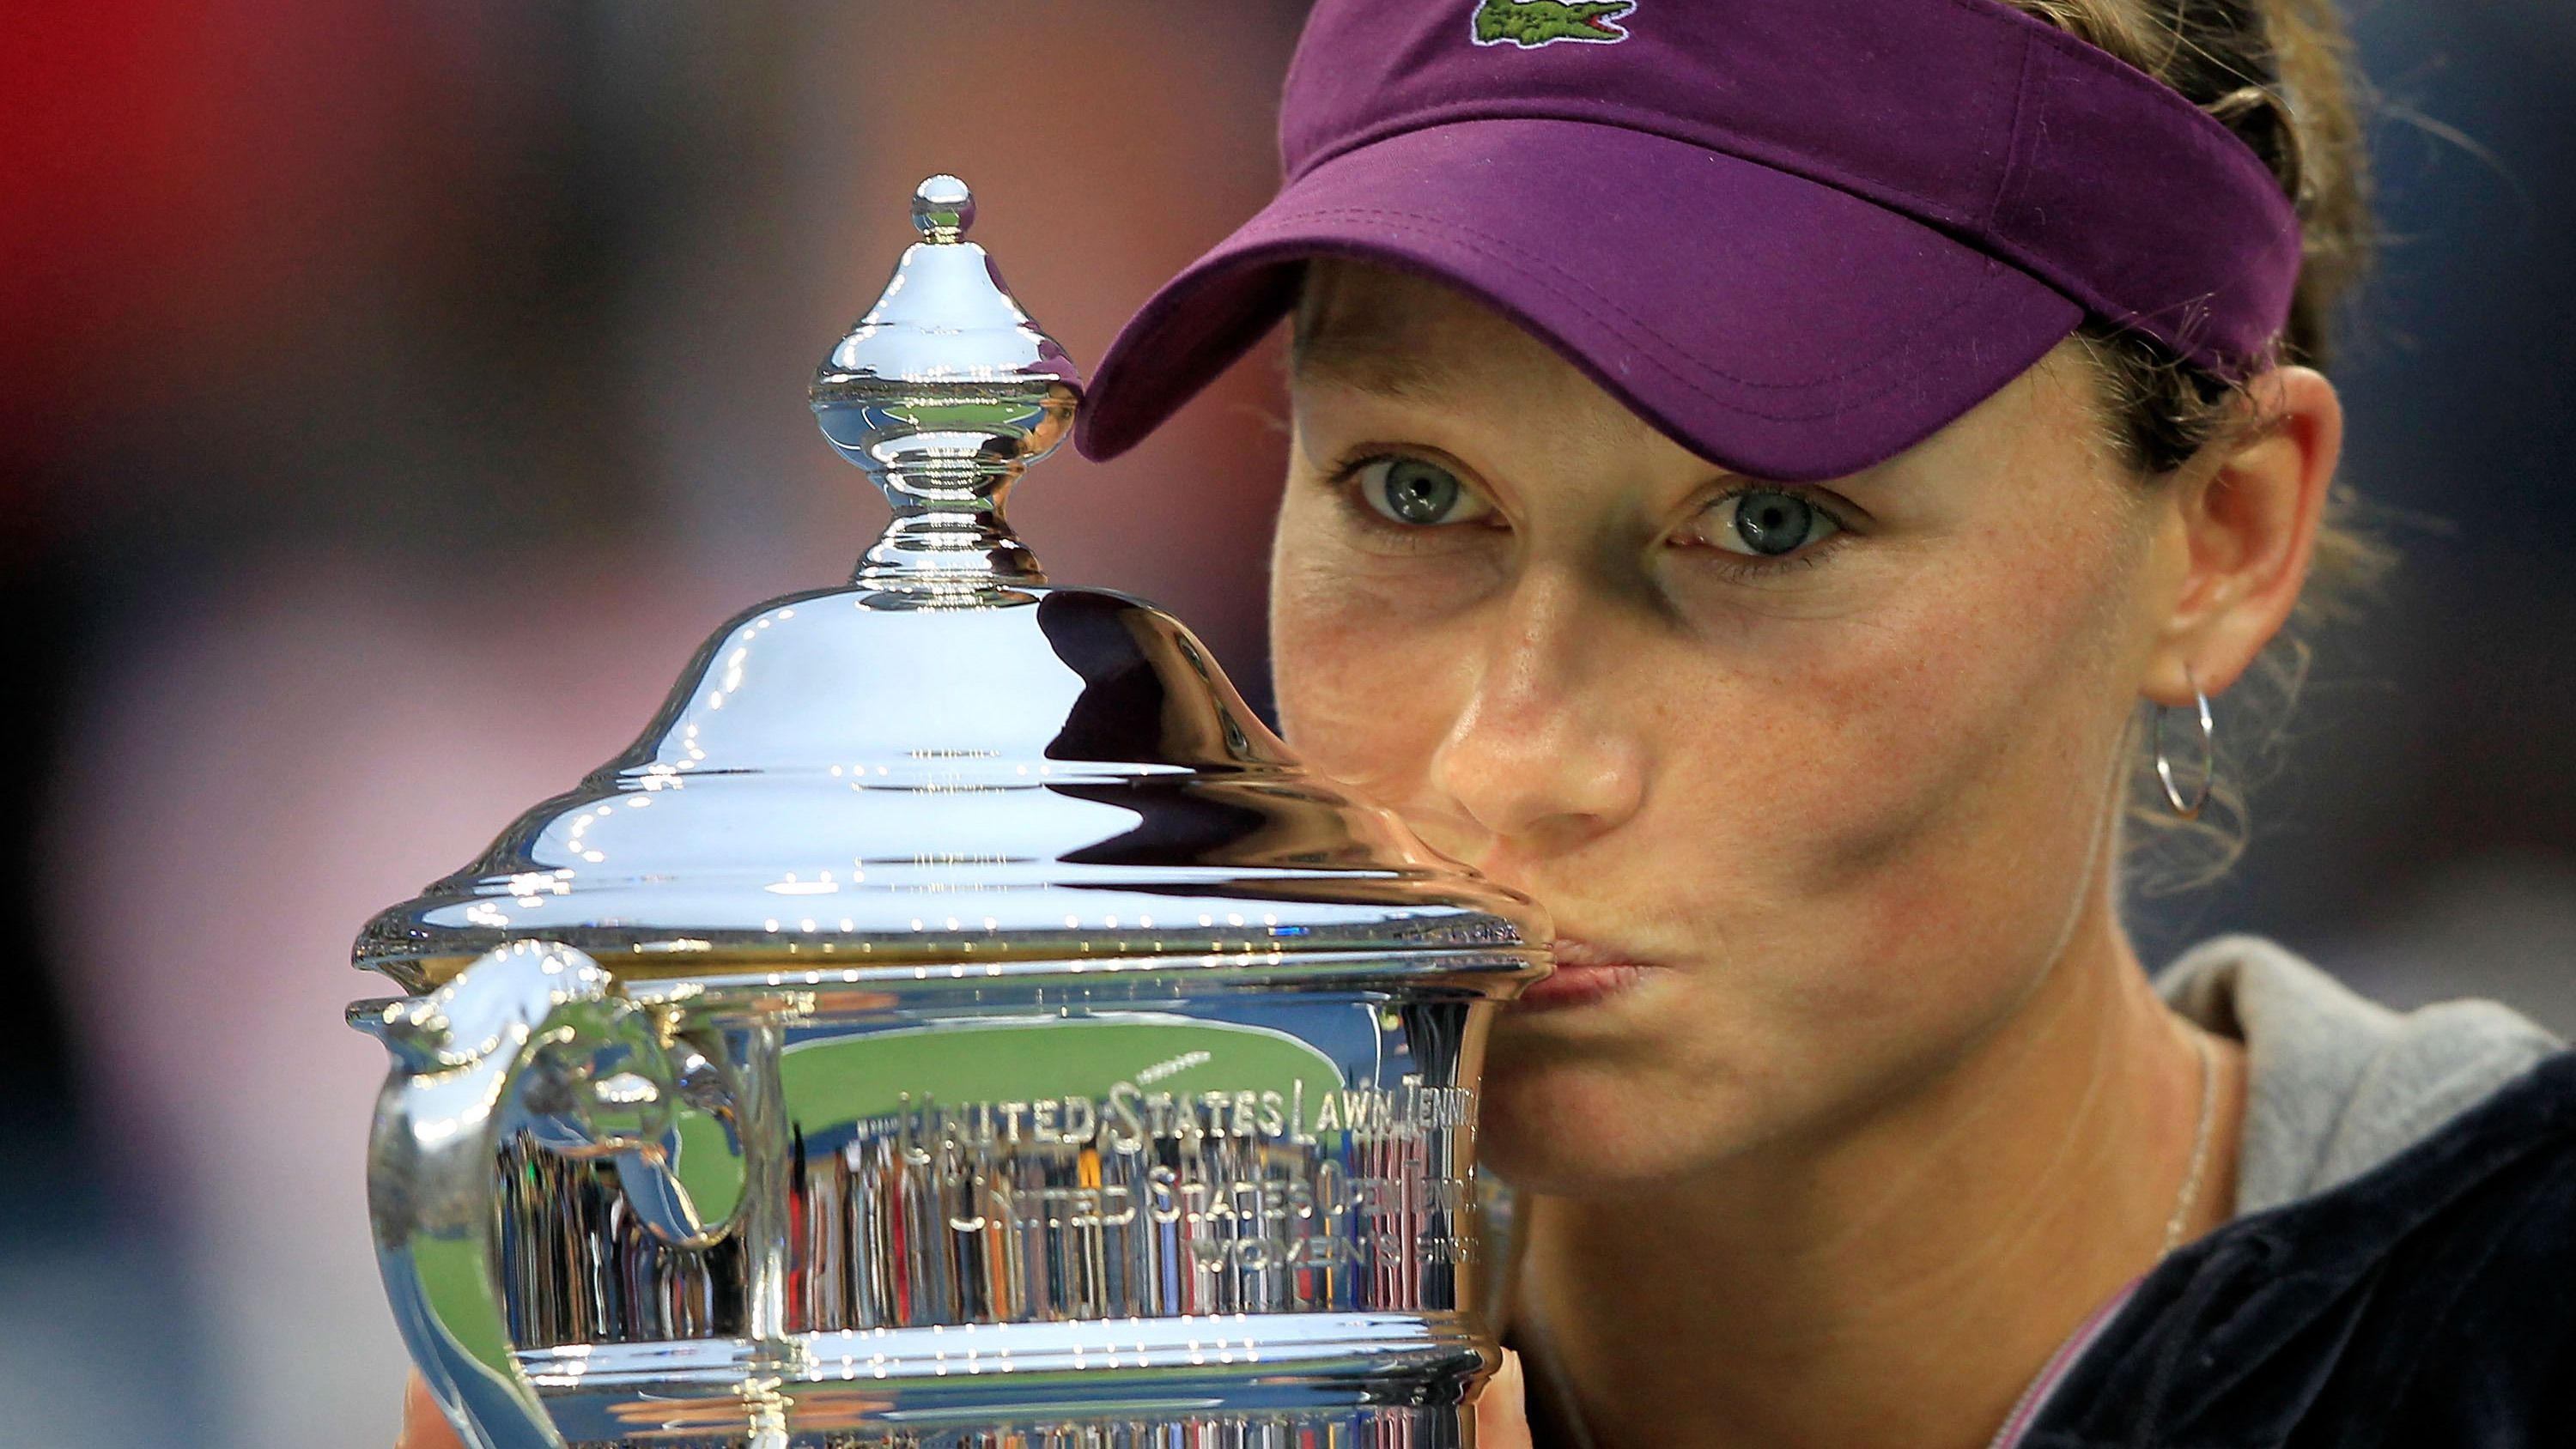 Samantha Stosur of Australia celebrates with the championship trophy after defeating Serena Williams of the United States to win the Women&#x27;s Singles Final on Day Fourteen of the 2011 US Open at the USTA Billie Jean King National Tennis Center on September 11, 2011 in the Flushing neighborhood of the Queens borough of New York City. (Photo by Chris Trotman/Getty Images)